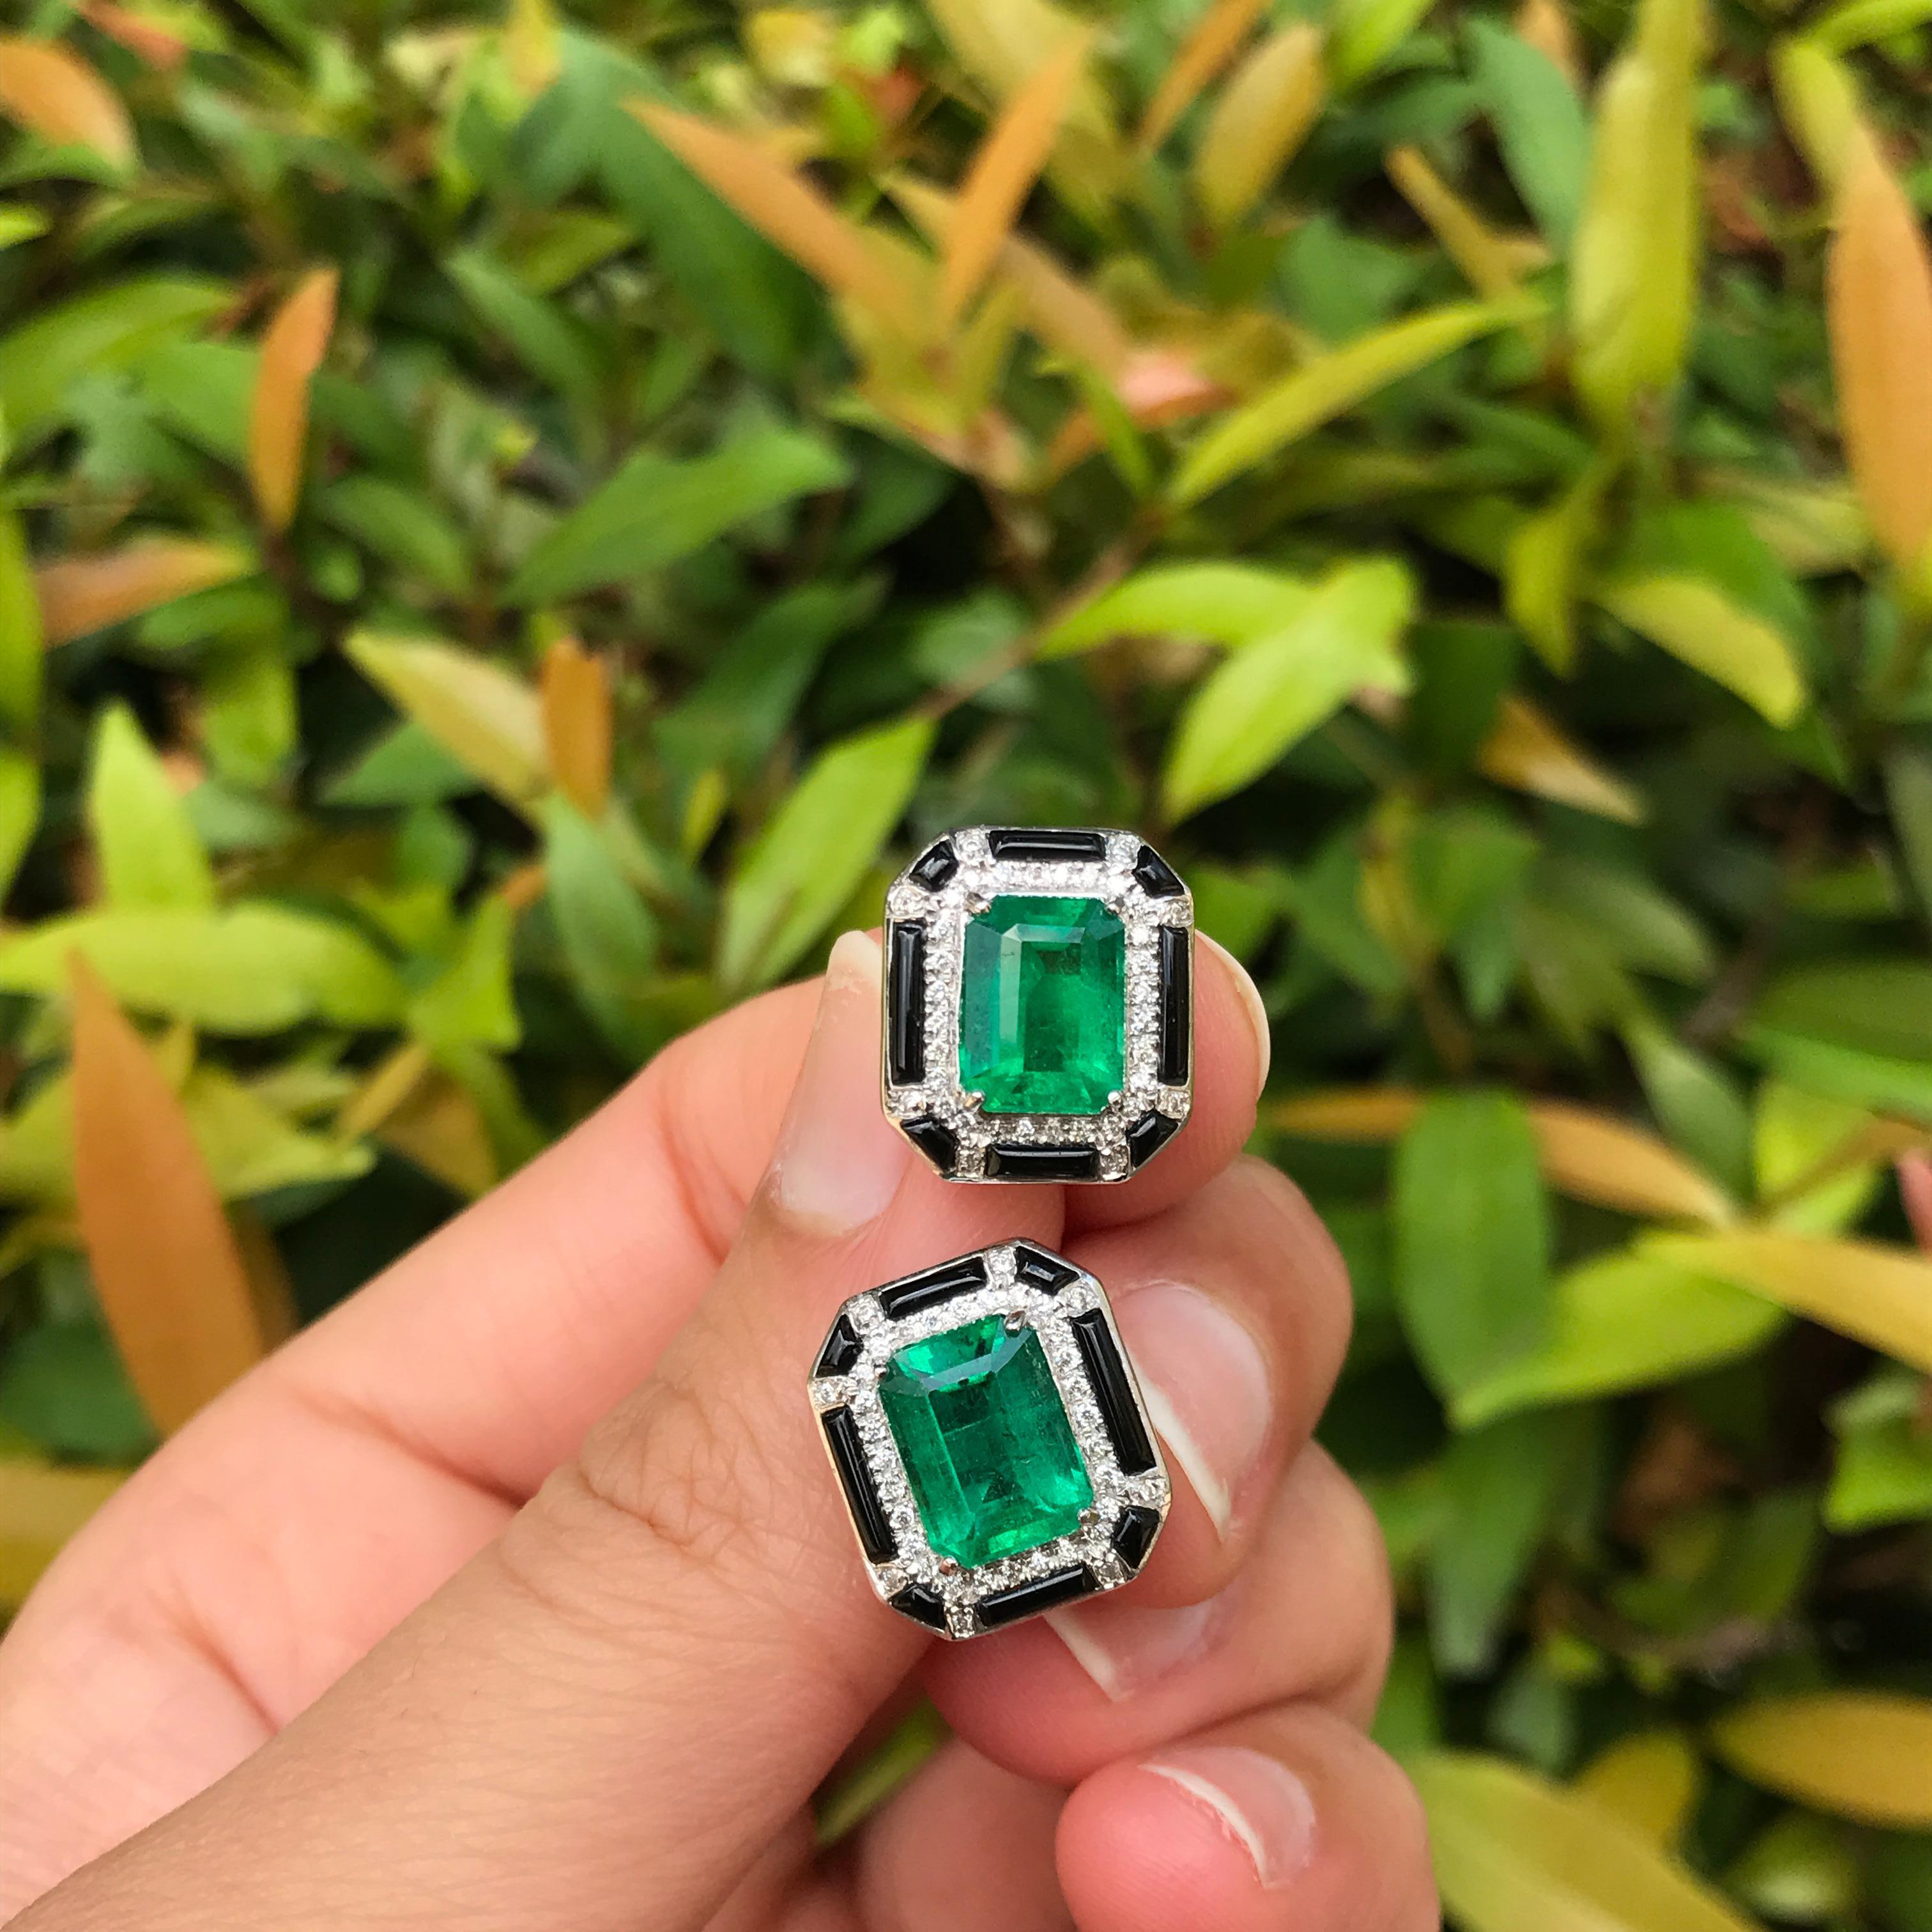 A beautiful pair of art-deco looking 3.85 carat lustrous Zambian Emerald of top quality and color, and Diamond studs with black onyx, all set in 18K White Gold. Push and pull backing included. 

Material Details: 

Stone: Zambian Emerald 
Weight: